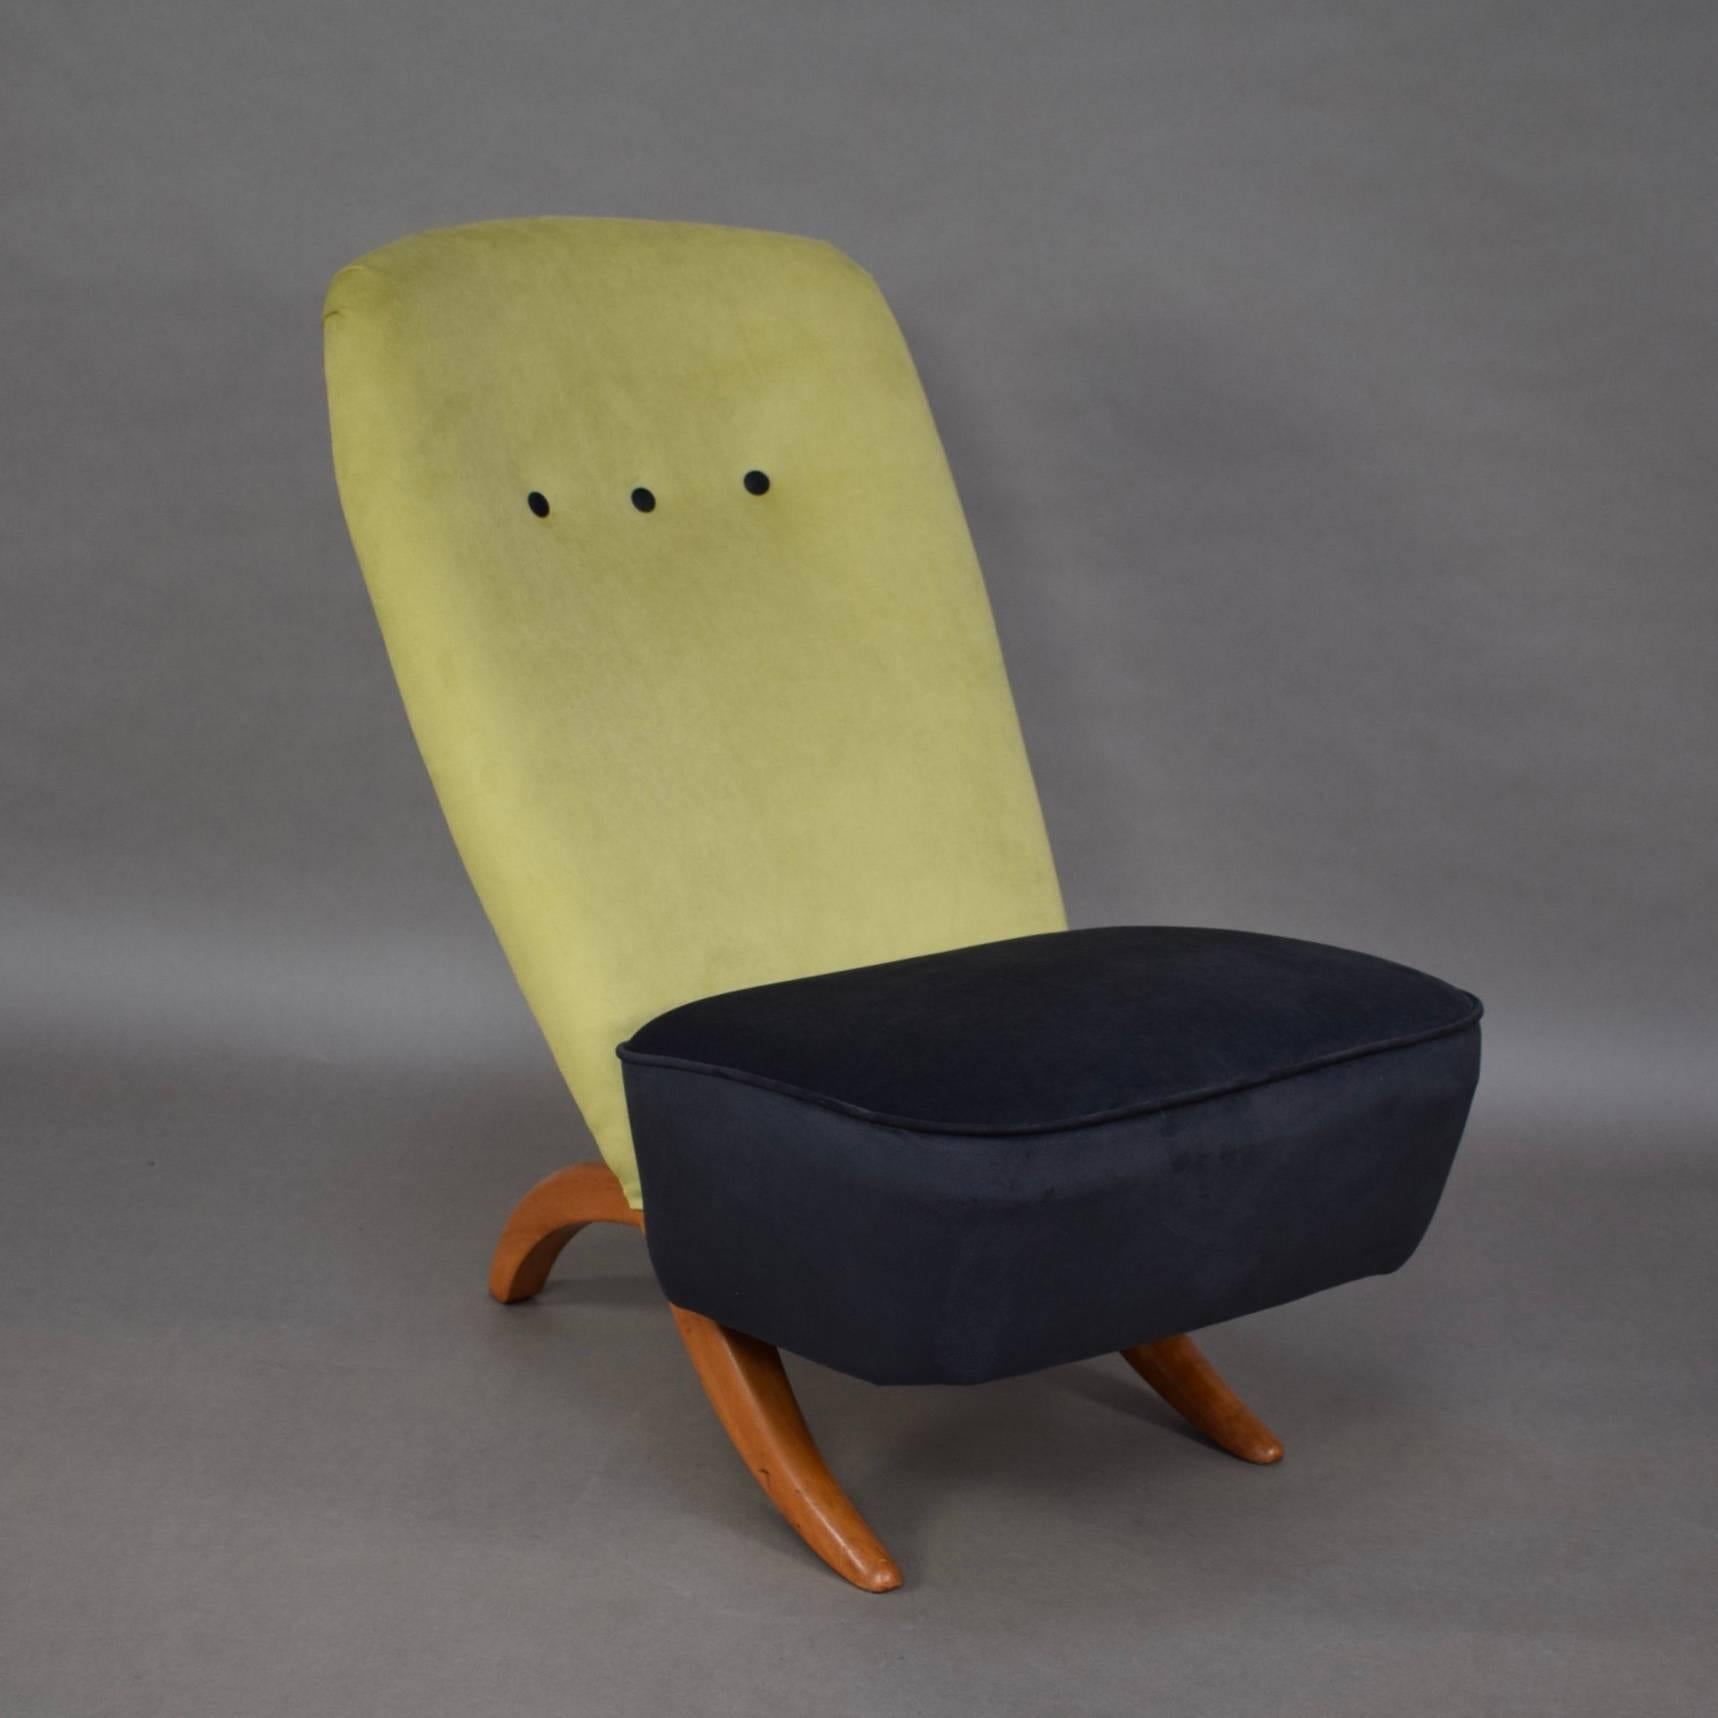 Ingenious design by Theo Ruth. The seat and back slide together which creates a locking scissor effect. Beautiful new upholstery.

Manufacturer: Artifort
Designer: Theo Ruth
Country: Netherlands
Model: Penguin lounge chair
Material: Solid